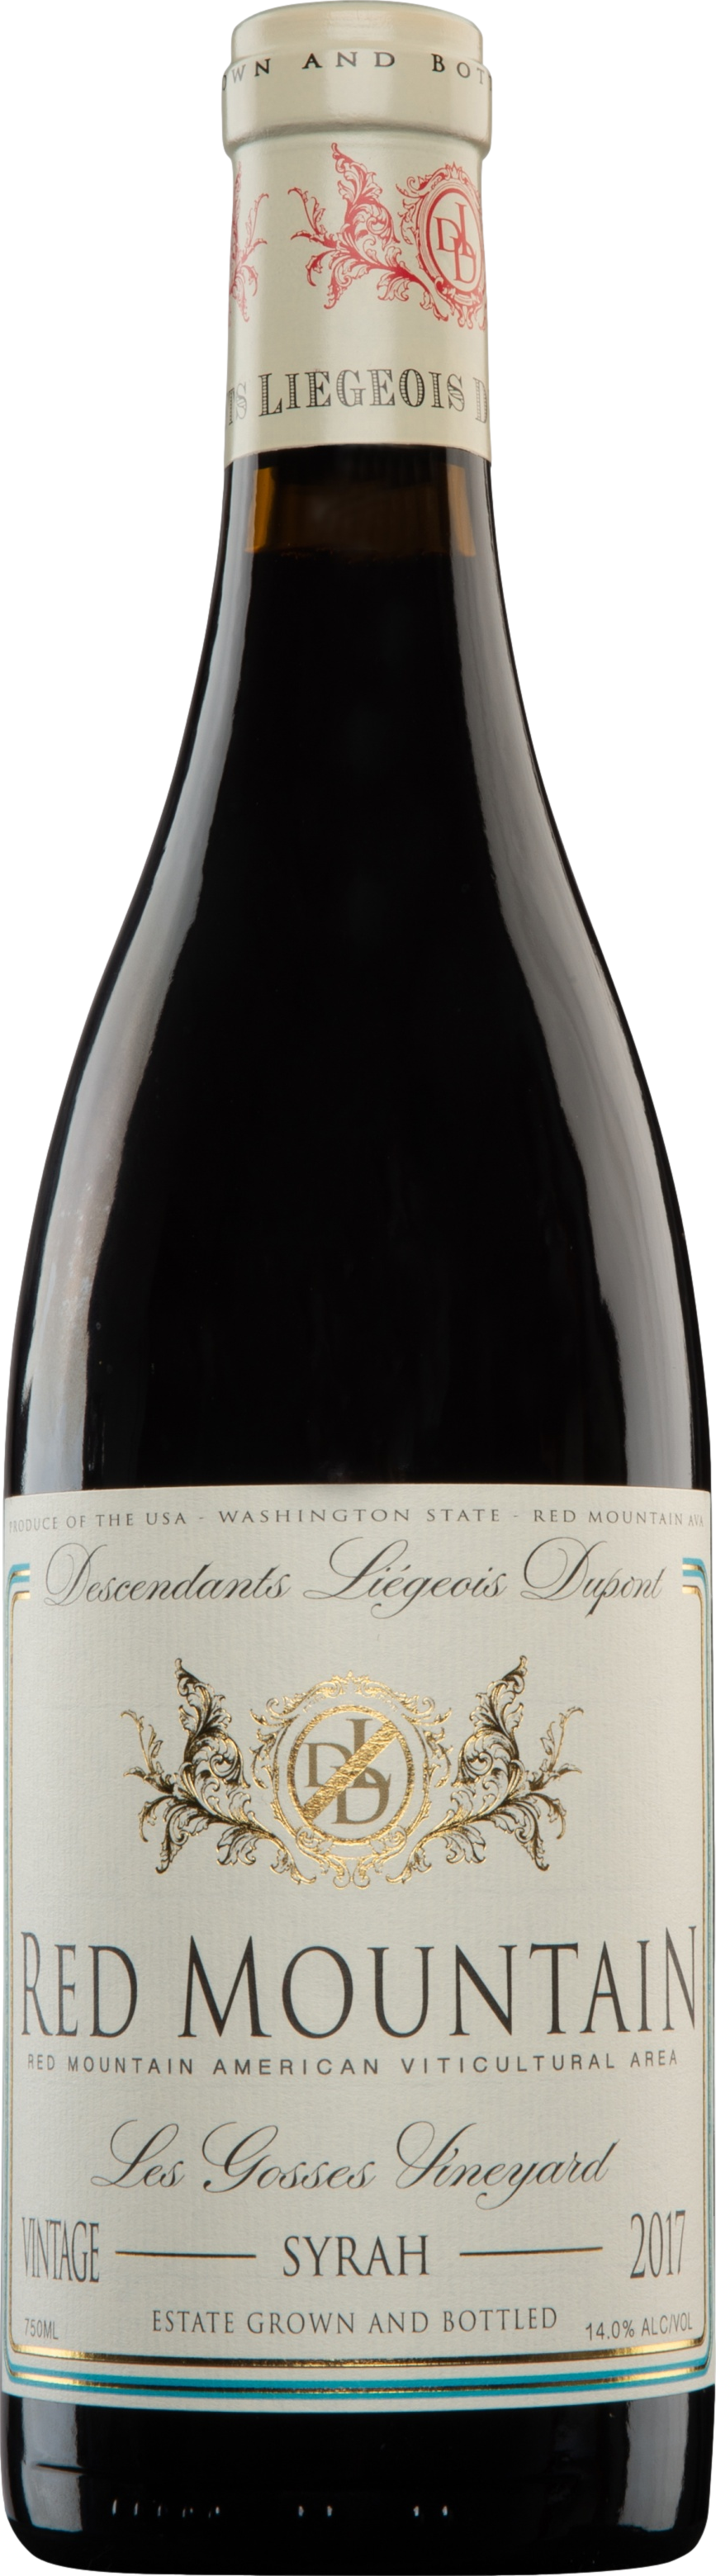 Hedges Family Descendants Liegeois Dupont Syrah 2017 Hedges Family 8wines DACH